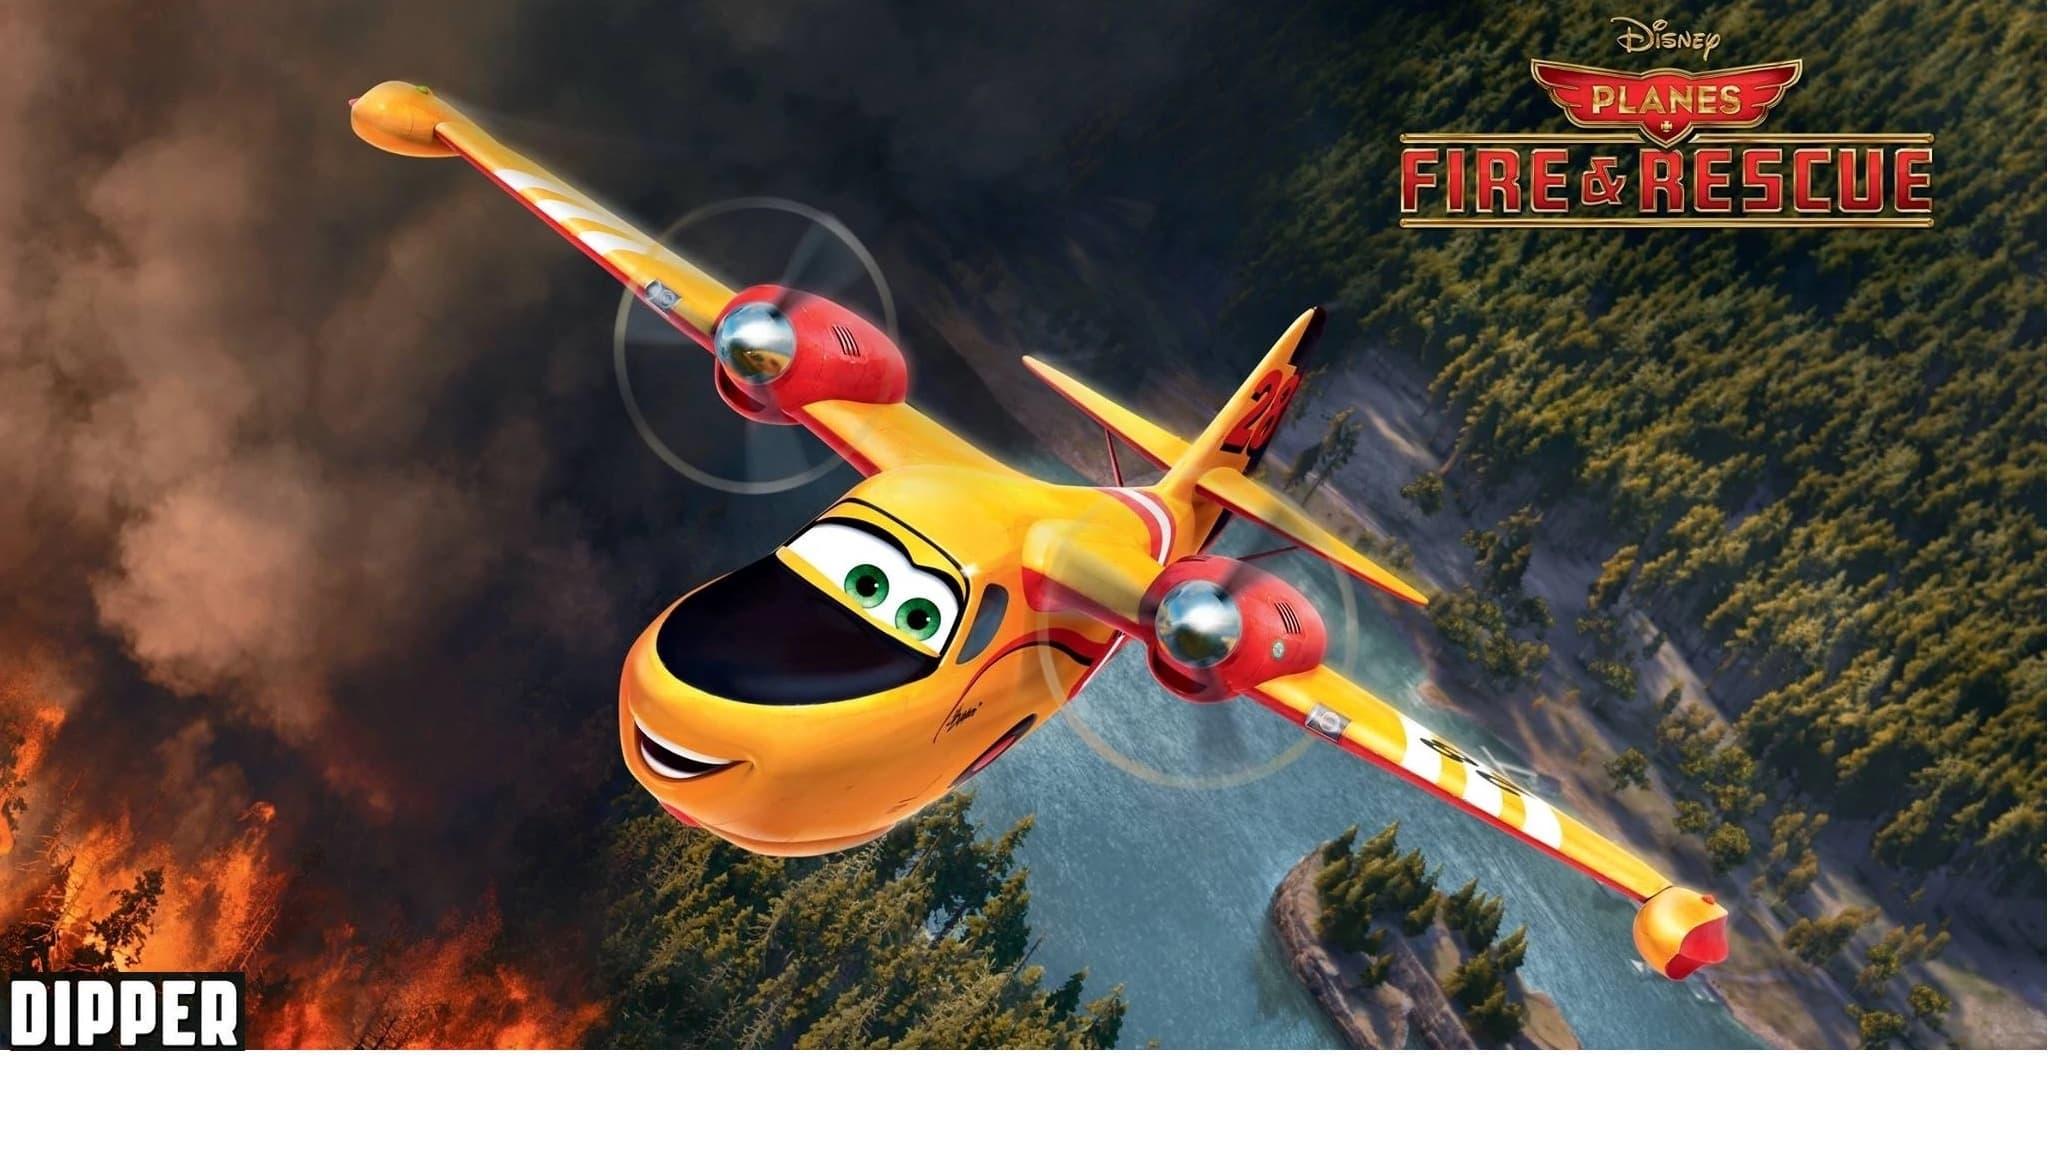 Planes Fire and Rescue: Dipper backdrop